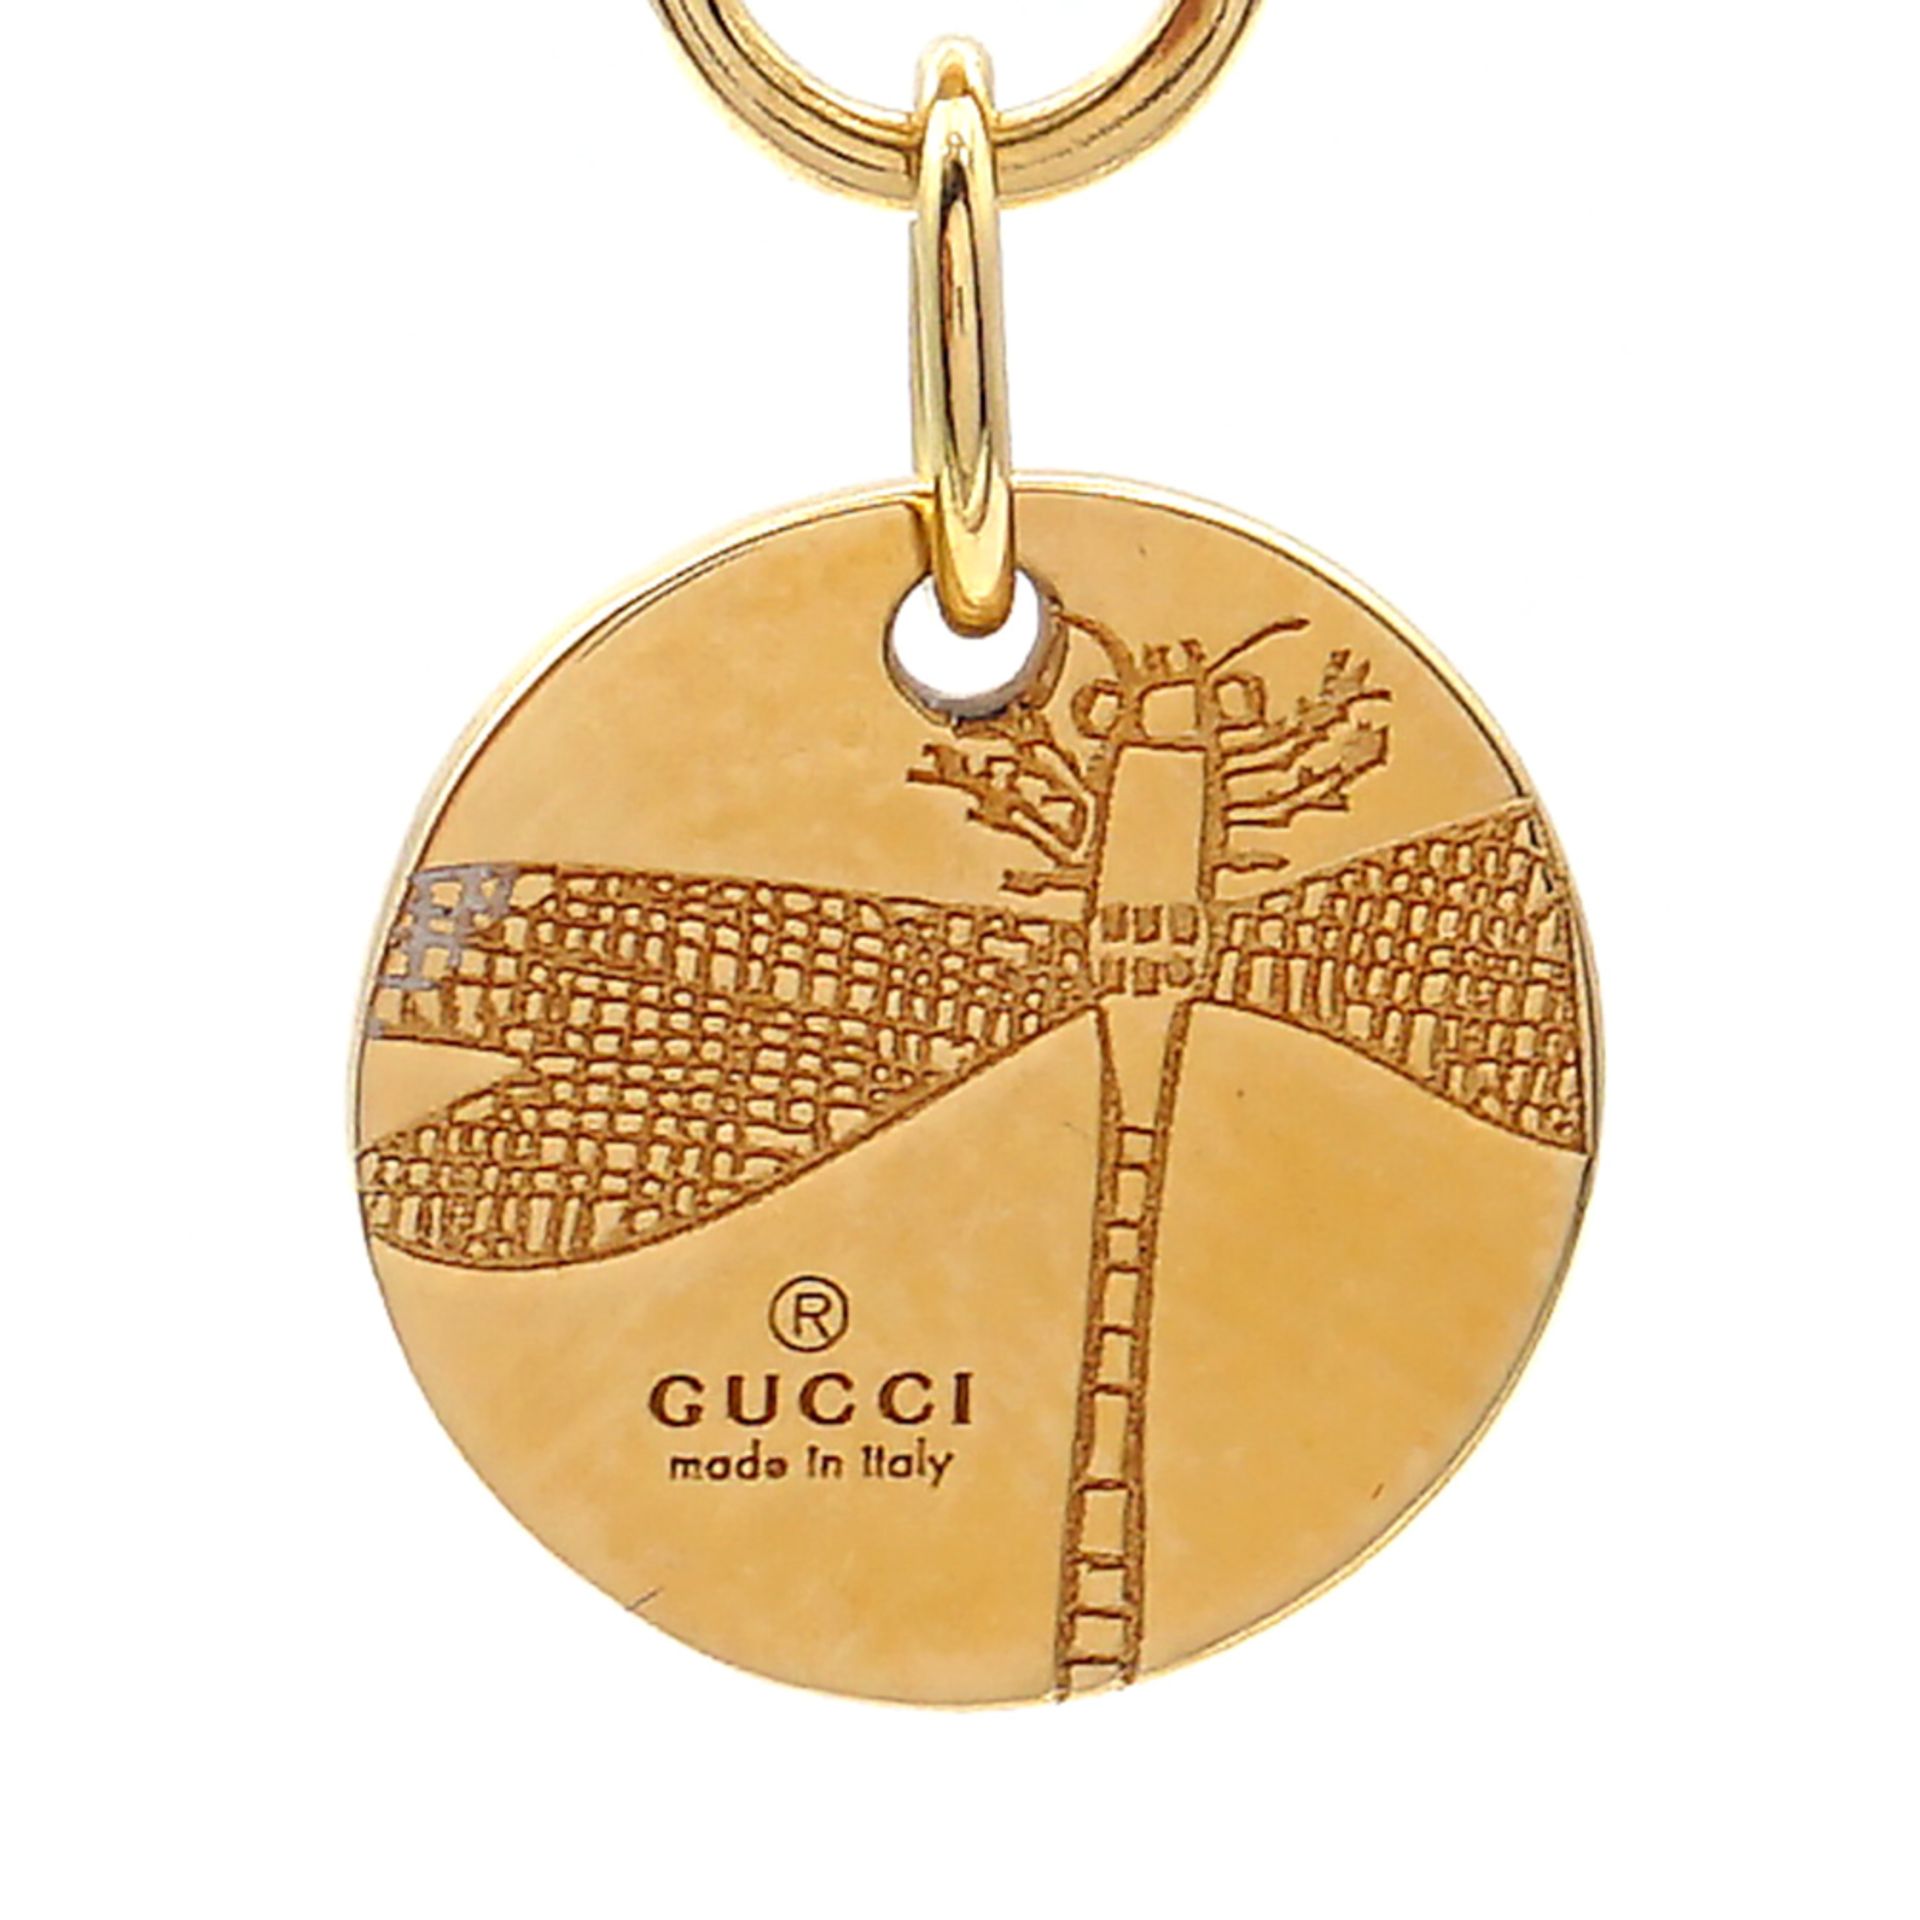 Gucci, Flora collection pendant earrings weight 4,8 gr. - Image 2 of 3